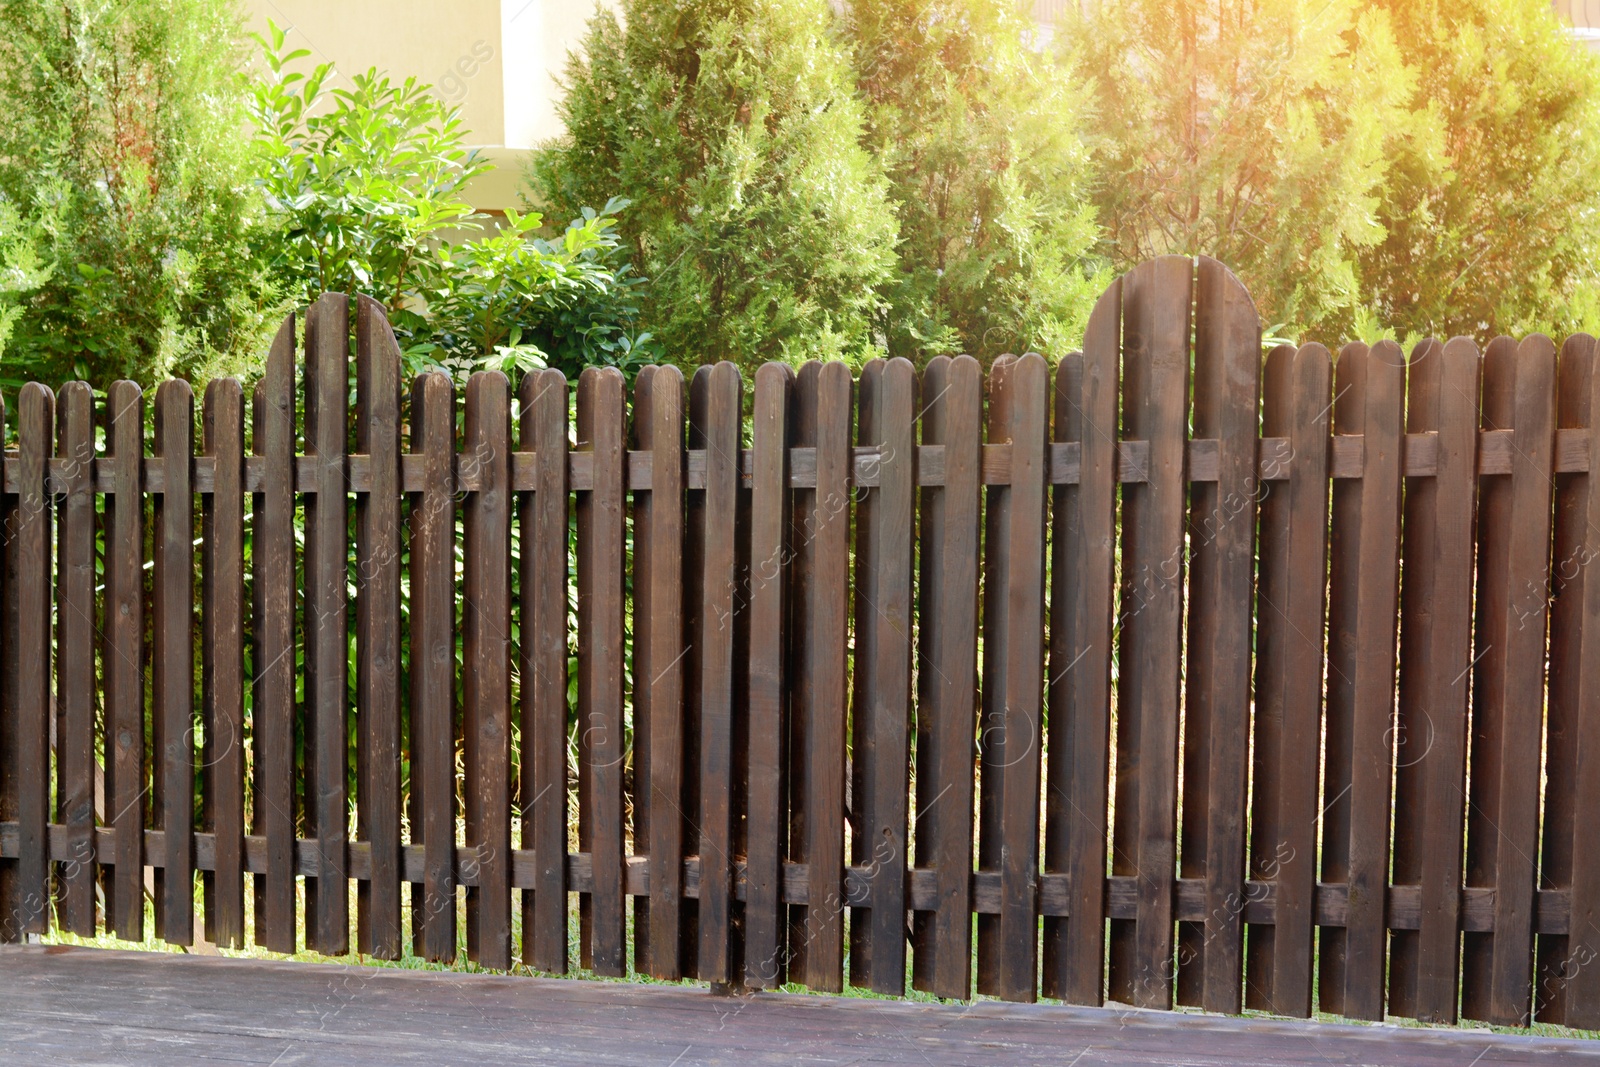 Photo of Wooden fence near beautiful trees on sunny day outdoors